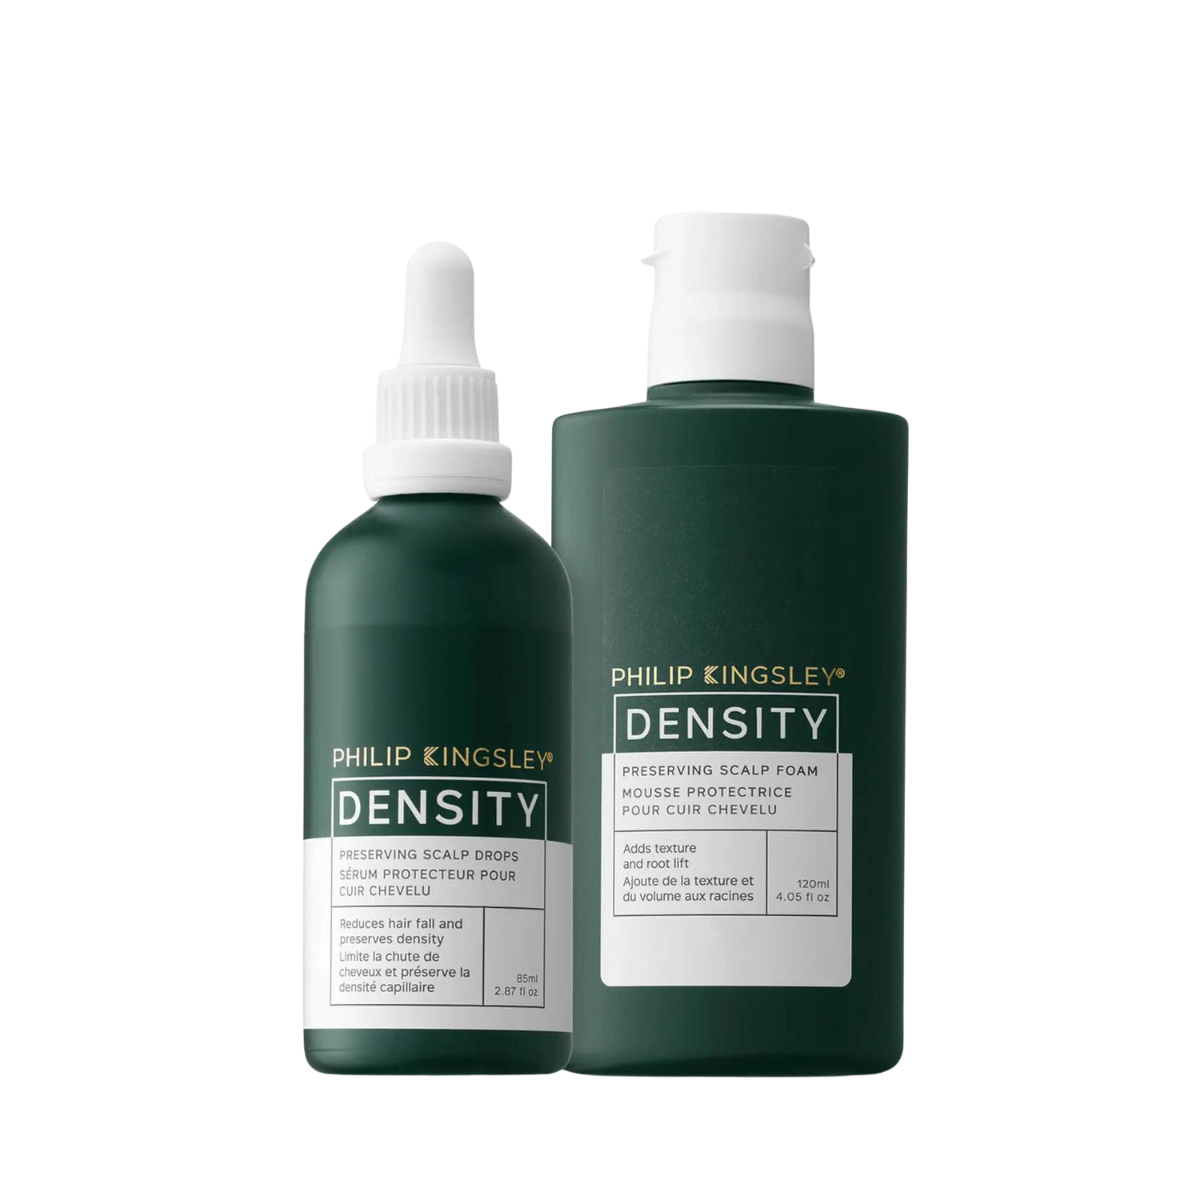 Philip Kingsley Density Hair and Scalp Preserving Collection